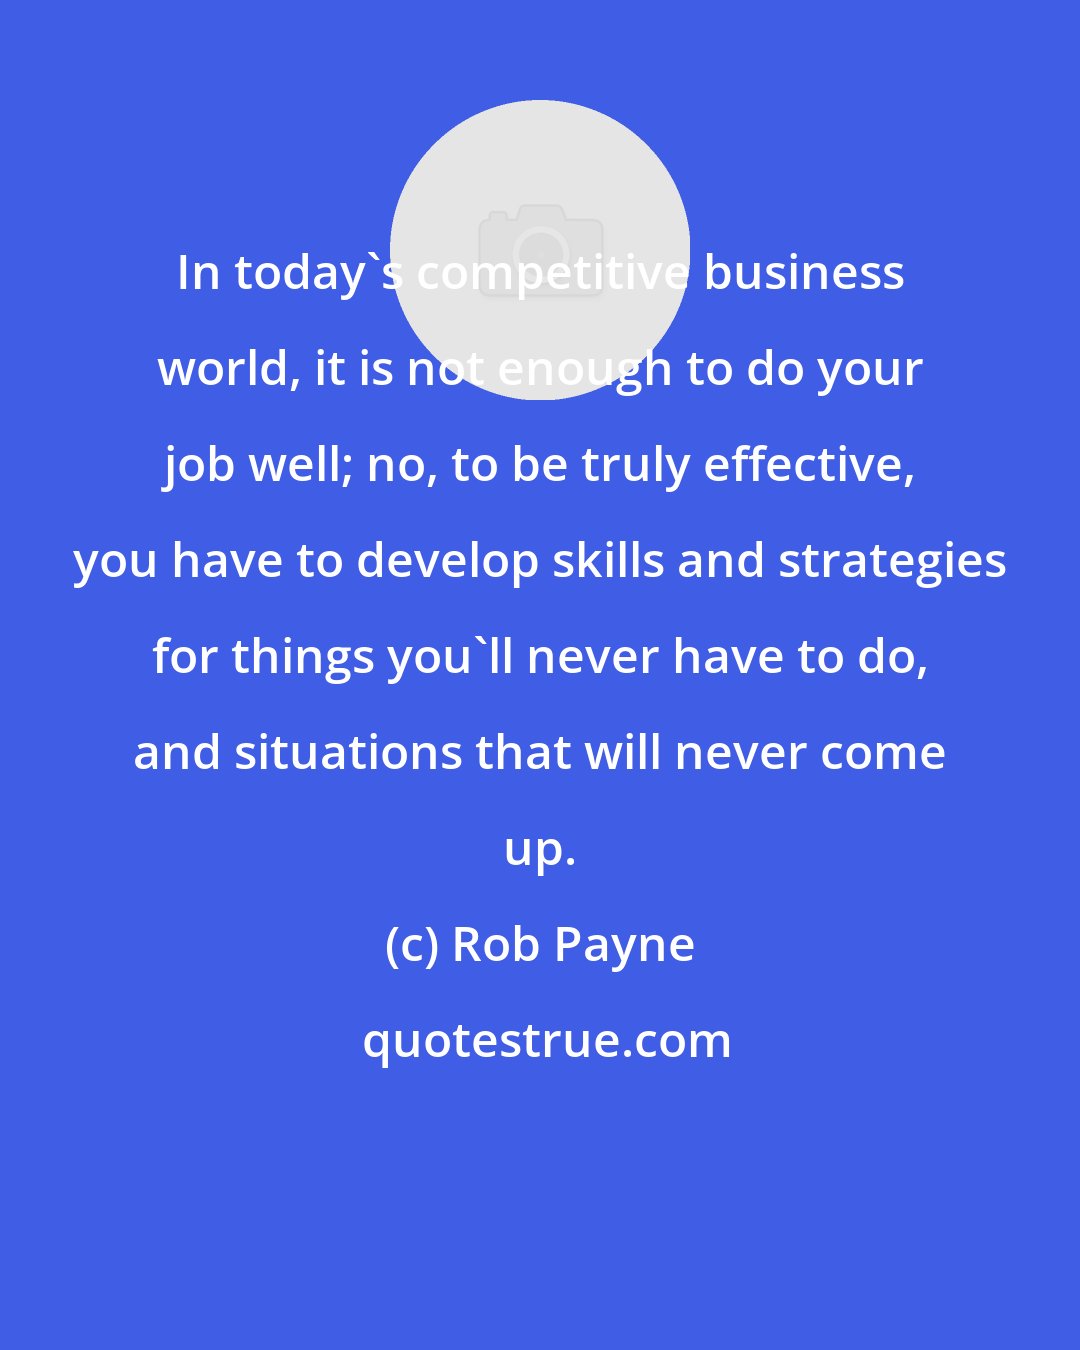 Rob Payne: In today's competitive business world, it is not enough to do your job well; no, to be truly effective, you have to develop skills and strategies for things you'll never have to do, and situations that will never come up.